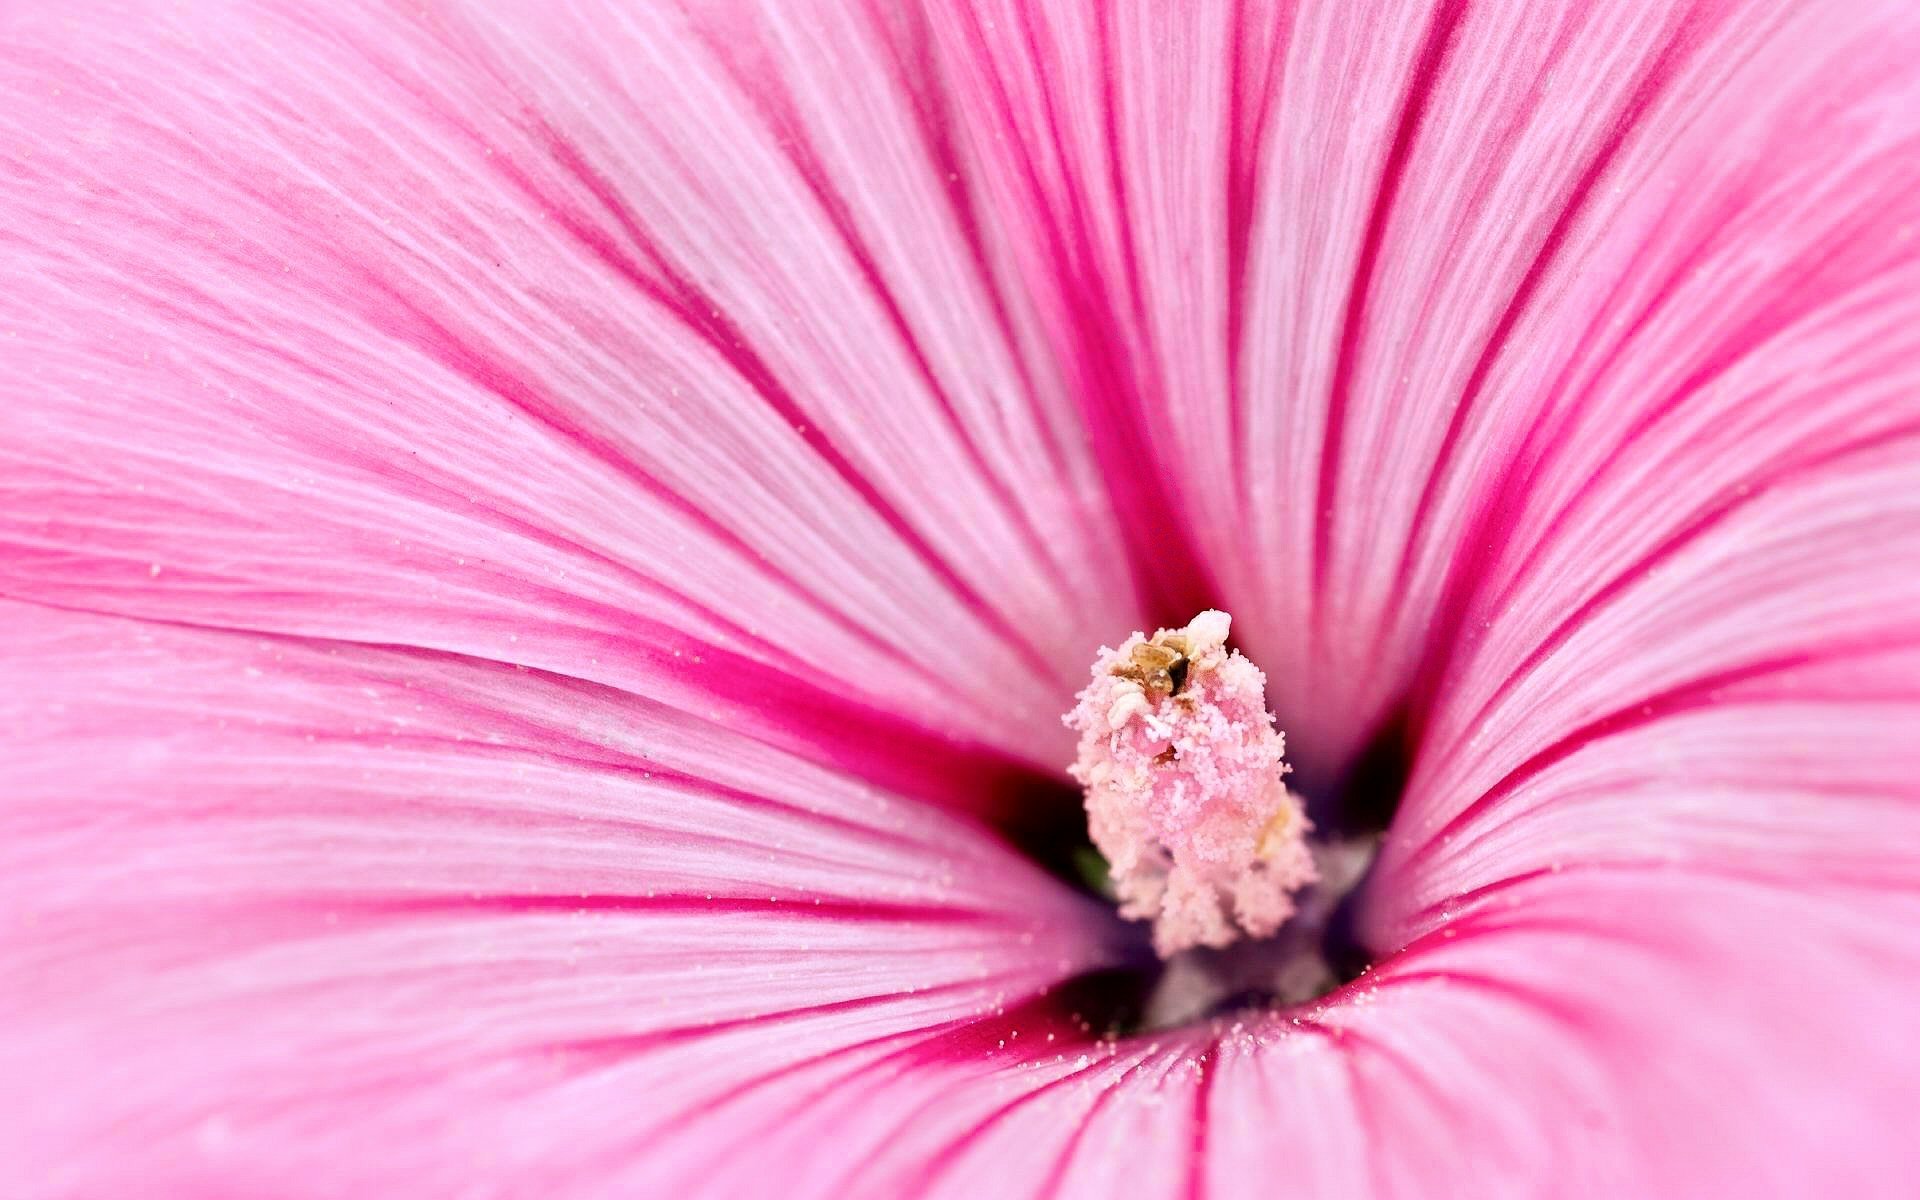 Vibrant pink hibiscus flower in a natural setting, perfect as an HD desktop wallpaper and background.